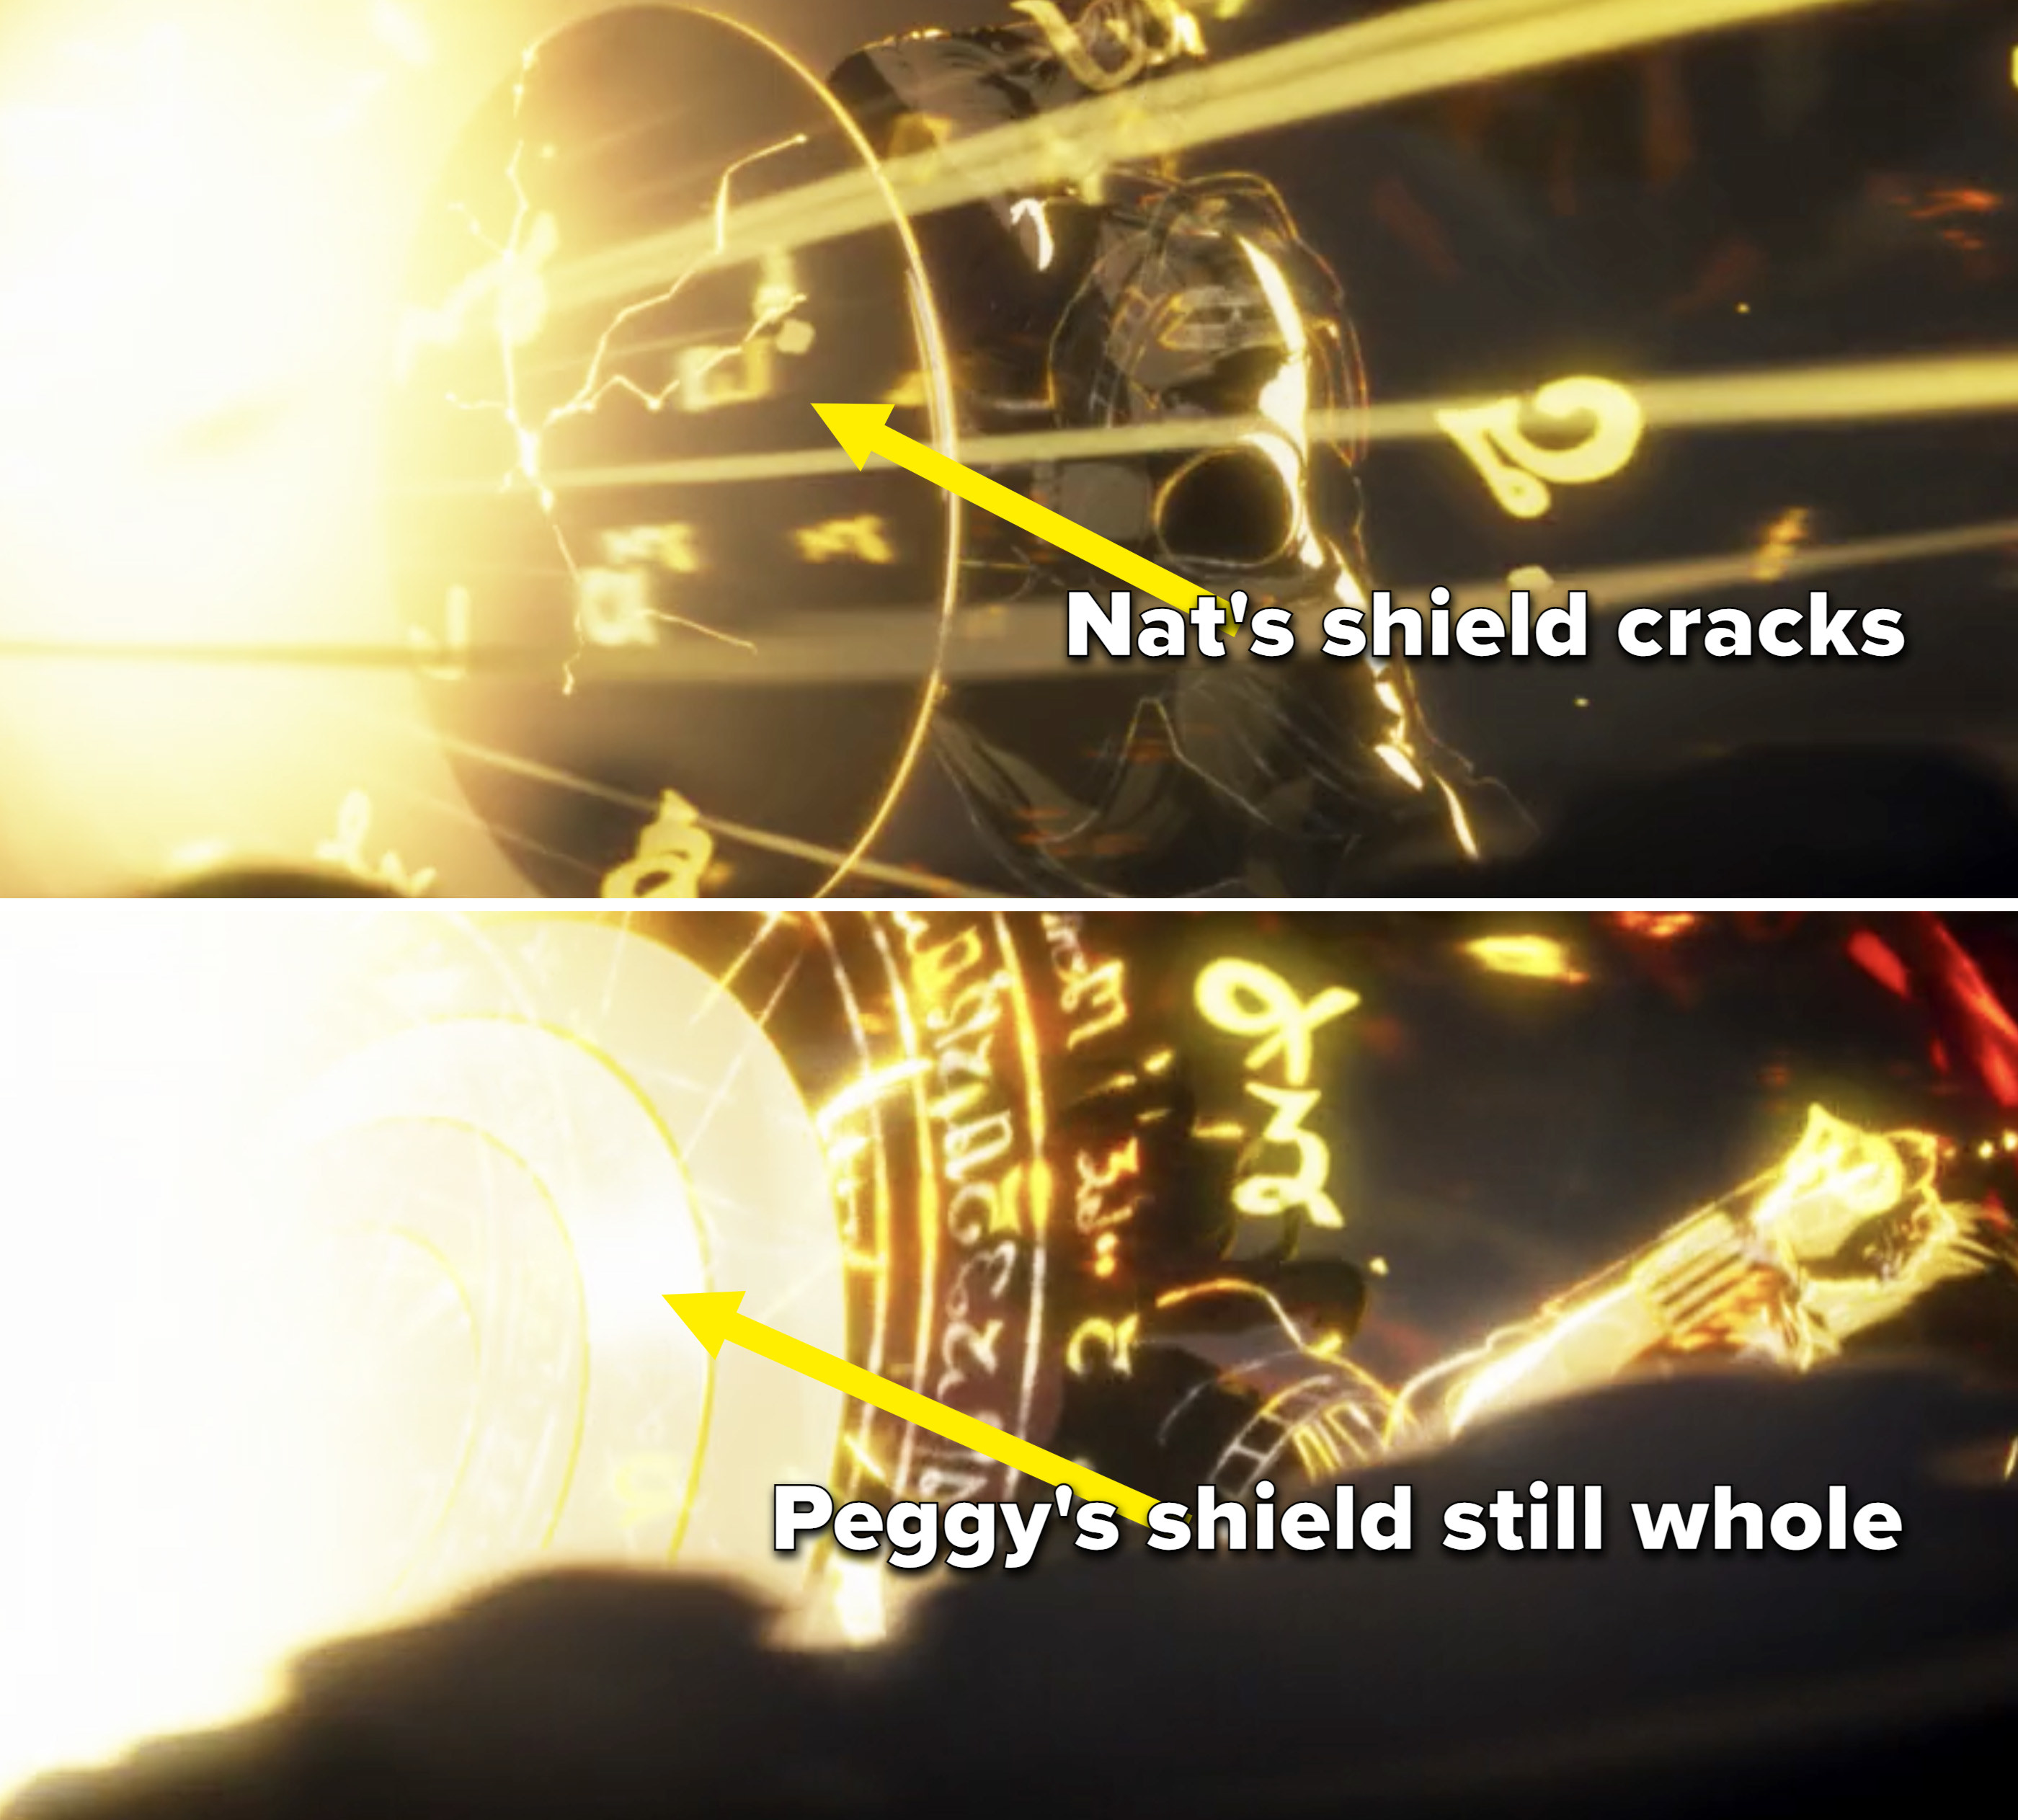 Close-ups of Nat&#x27;s shield cracking vs Peggy&#x27;s staying whole